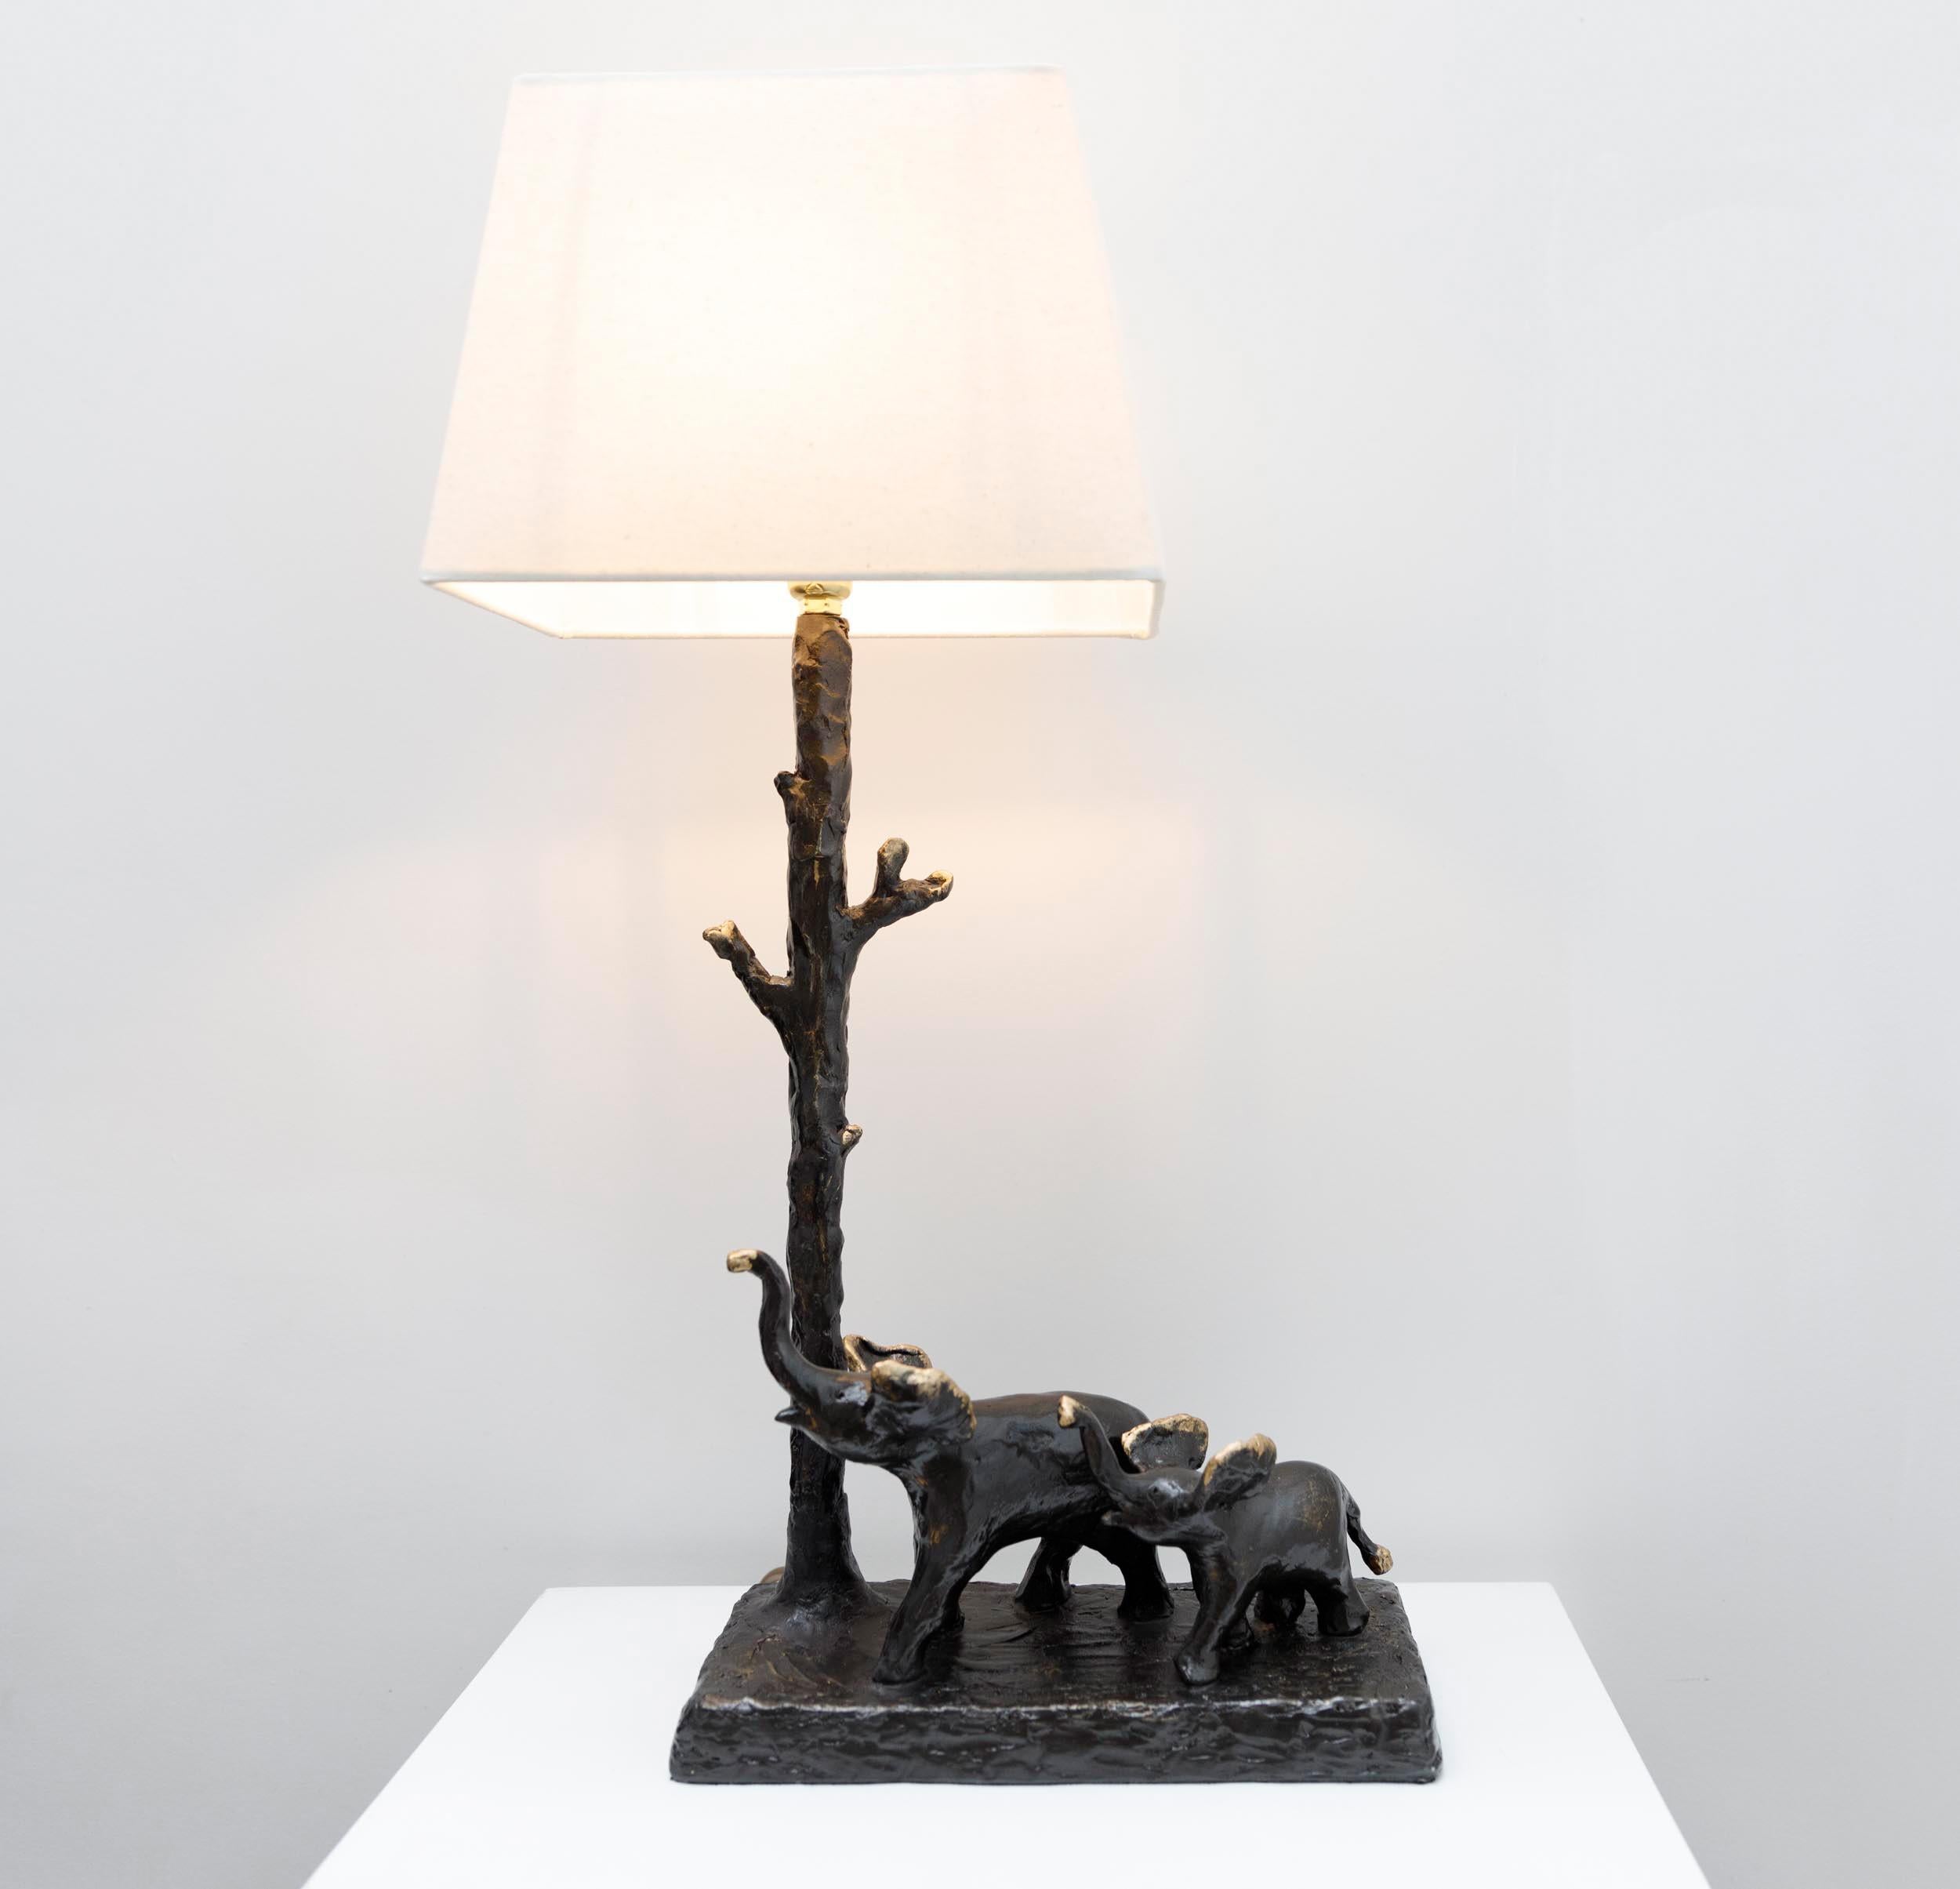 Last in the series of resin cast sculptural table lamps, this one of a kind lamp of mother and baby elephant is  hand crafted molded and cast in resin.  A whimsical functional sculptural table lamp of elephants strolling along with their trunks